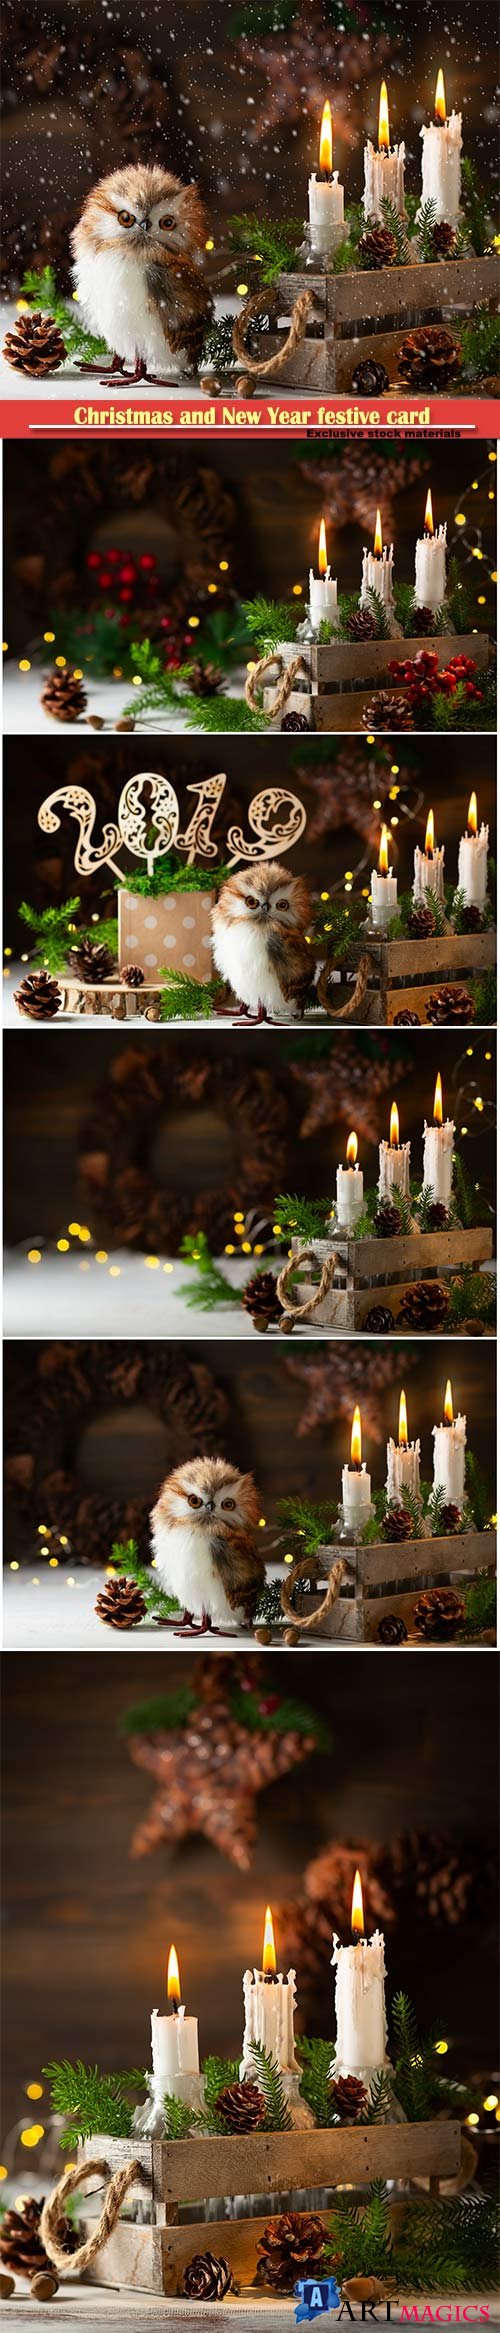 Christmas and New Year festive card, candles, owl, pine cones and fir branches in old box